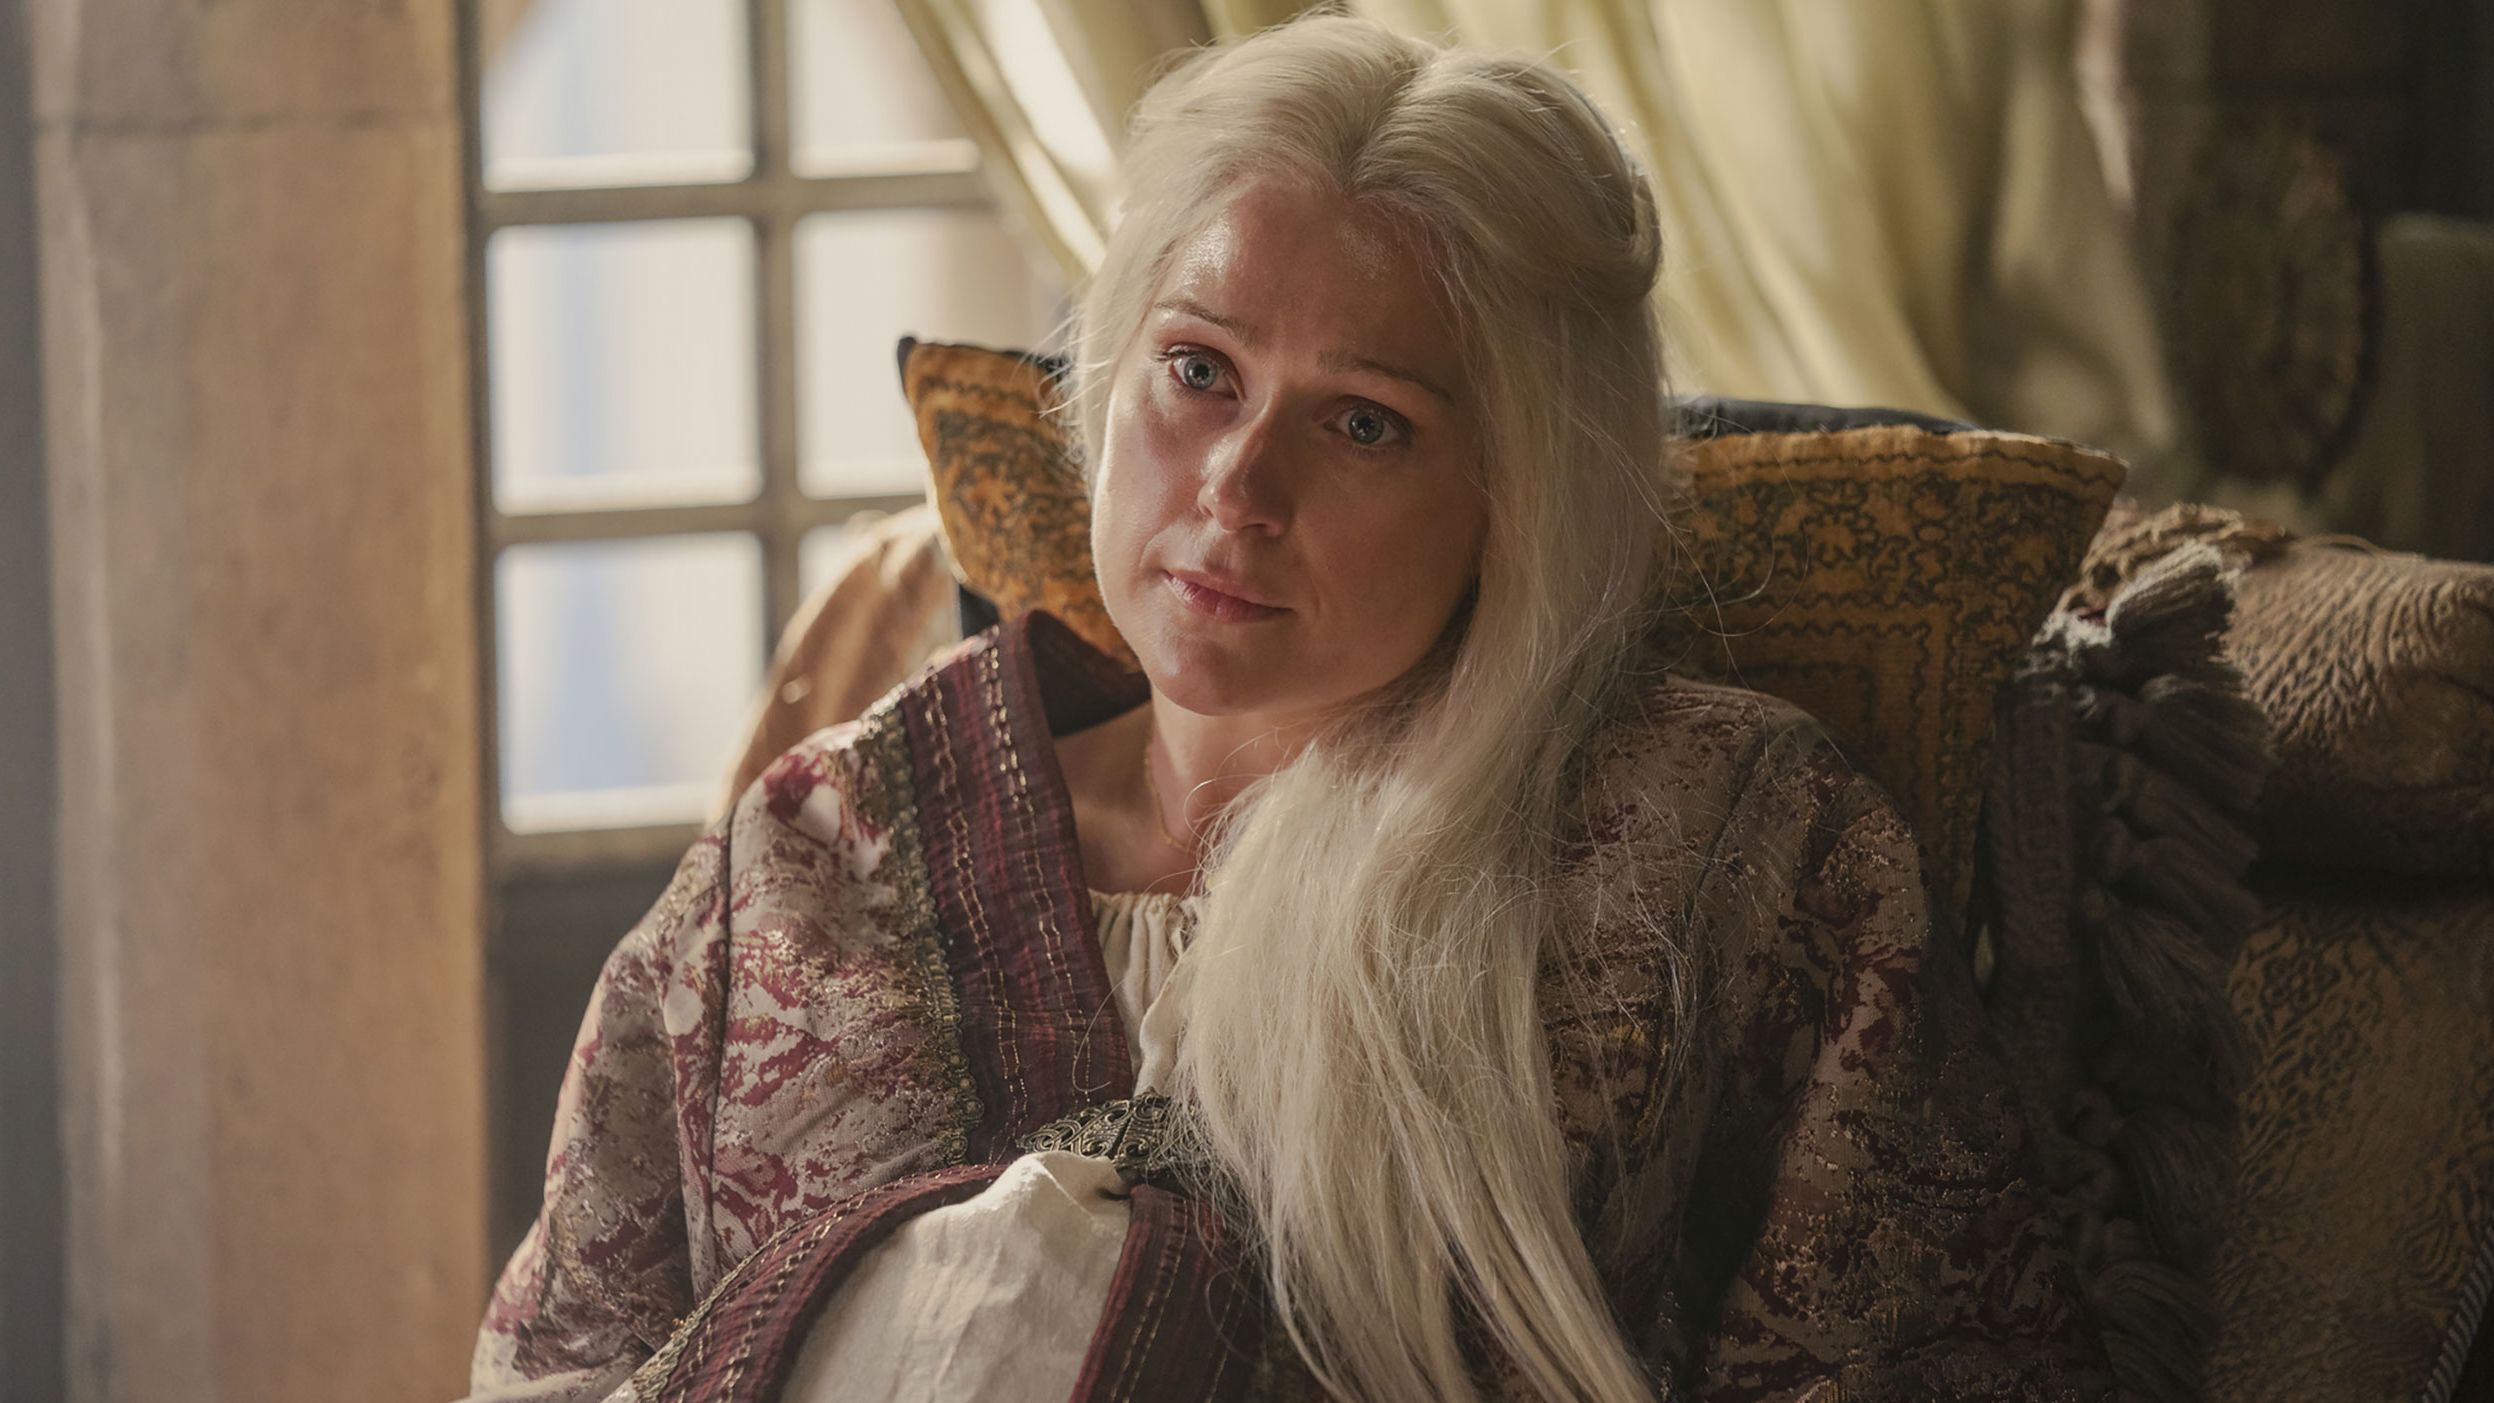 "The child bed is our battlefield," foreshadowed Aemma Targaryen, Queen of Westeros.